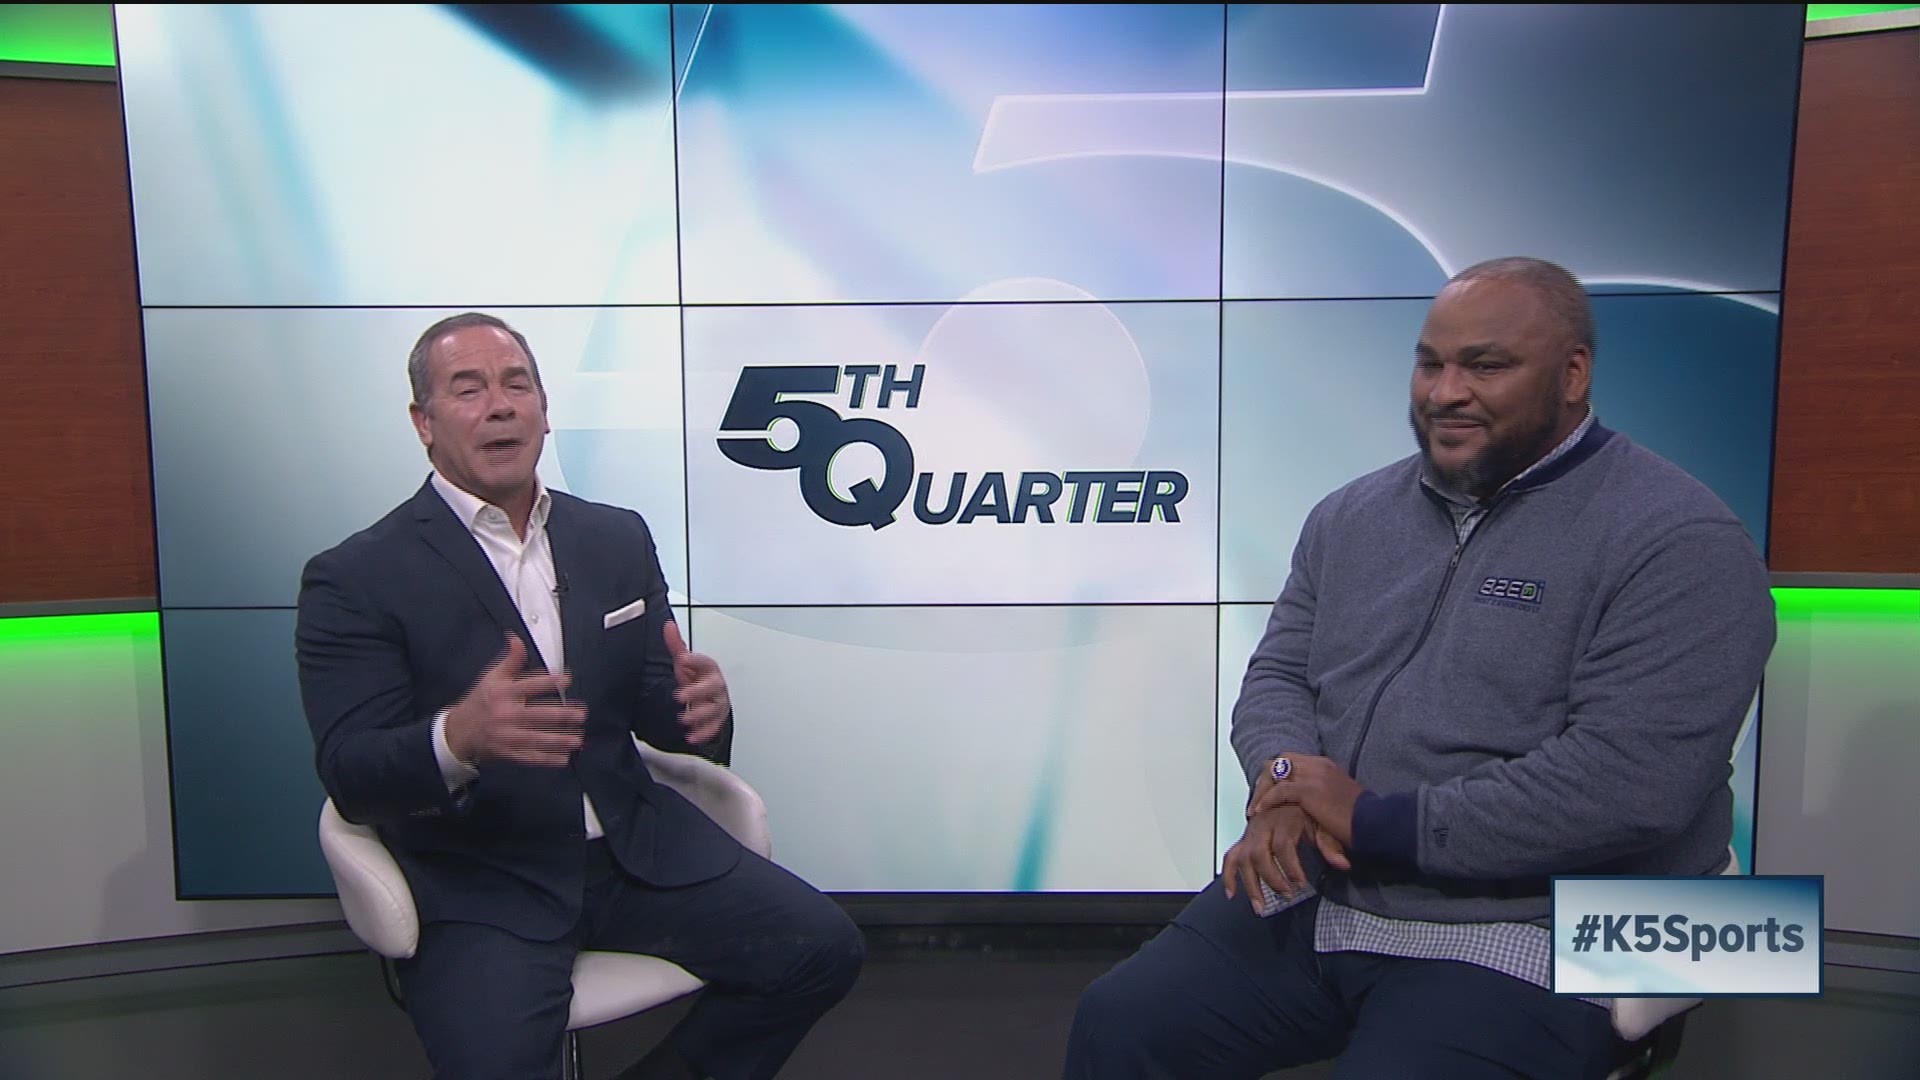 Seahawks Hall of Fame left tackle Walter Jones tells a story about slapping former Seahawks QB Matt Hasselbeck.  Hear Walt's story from the "5th Quarter."